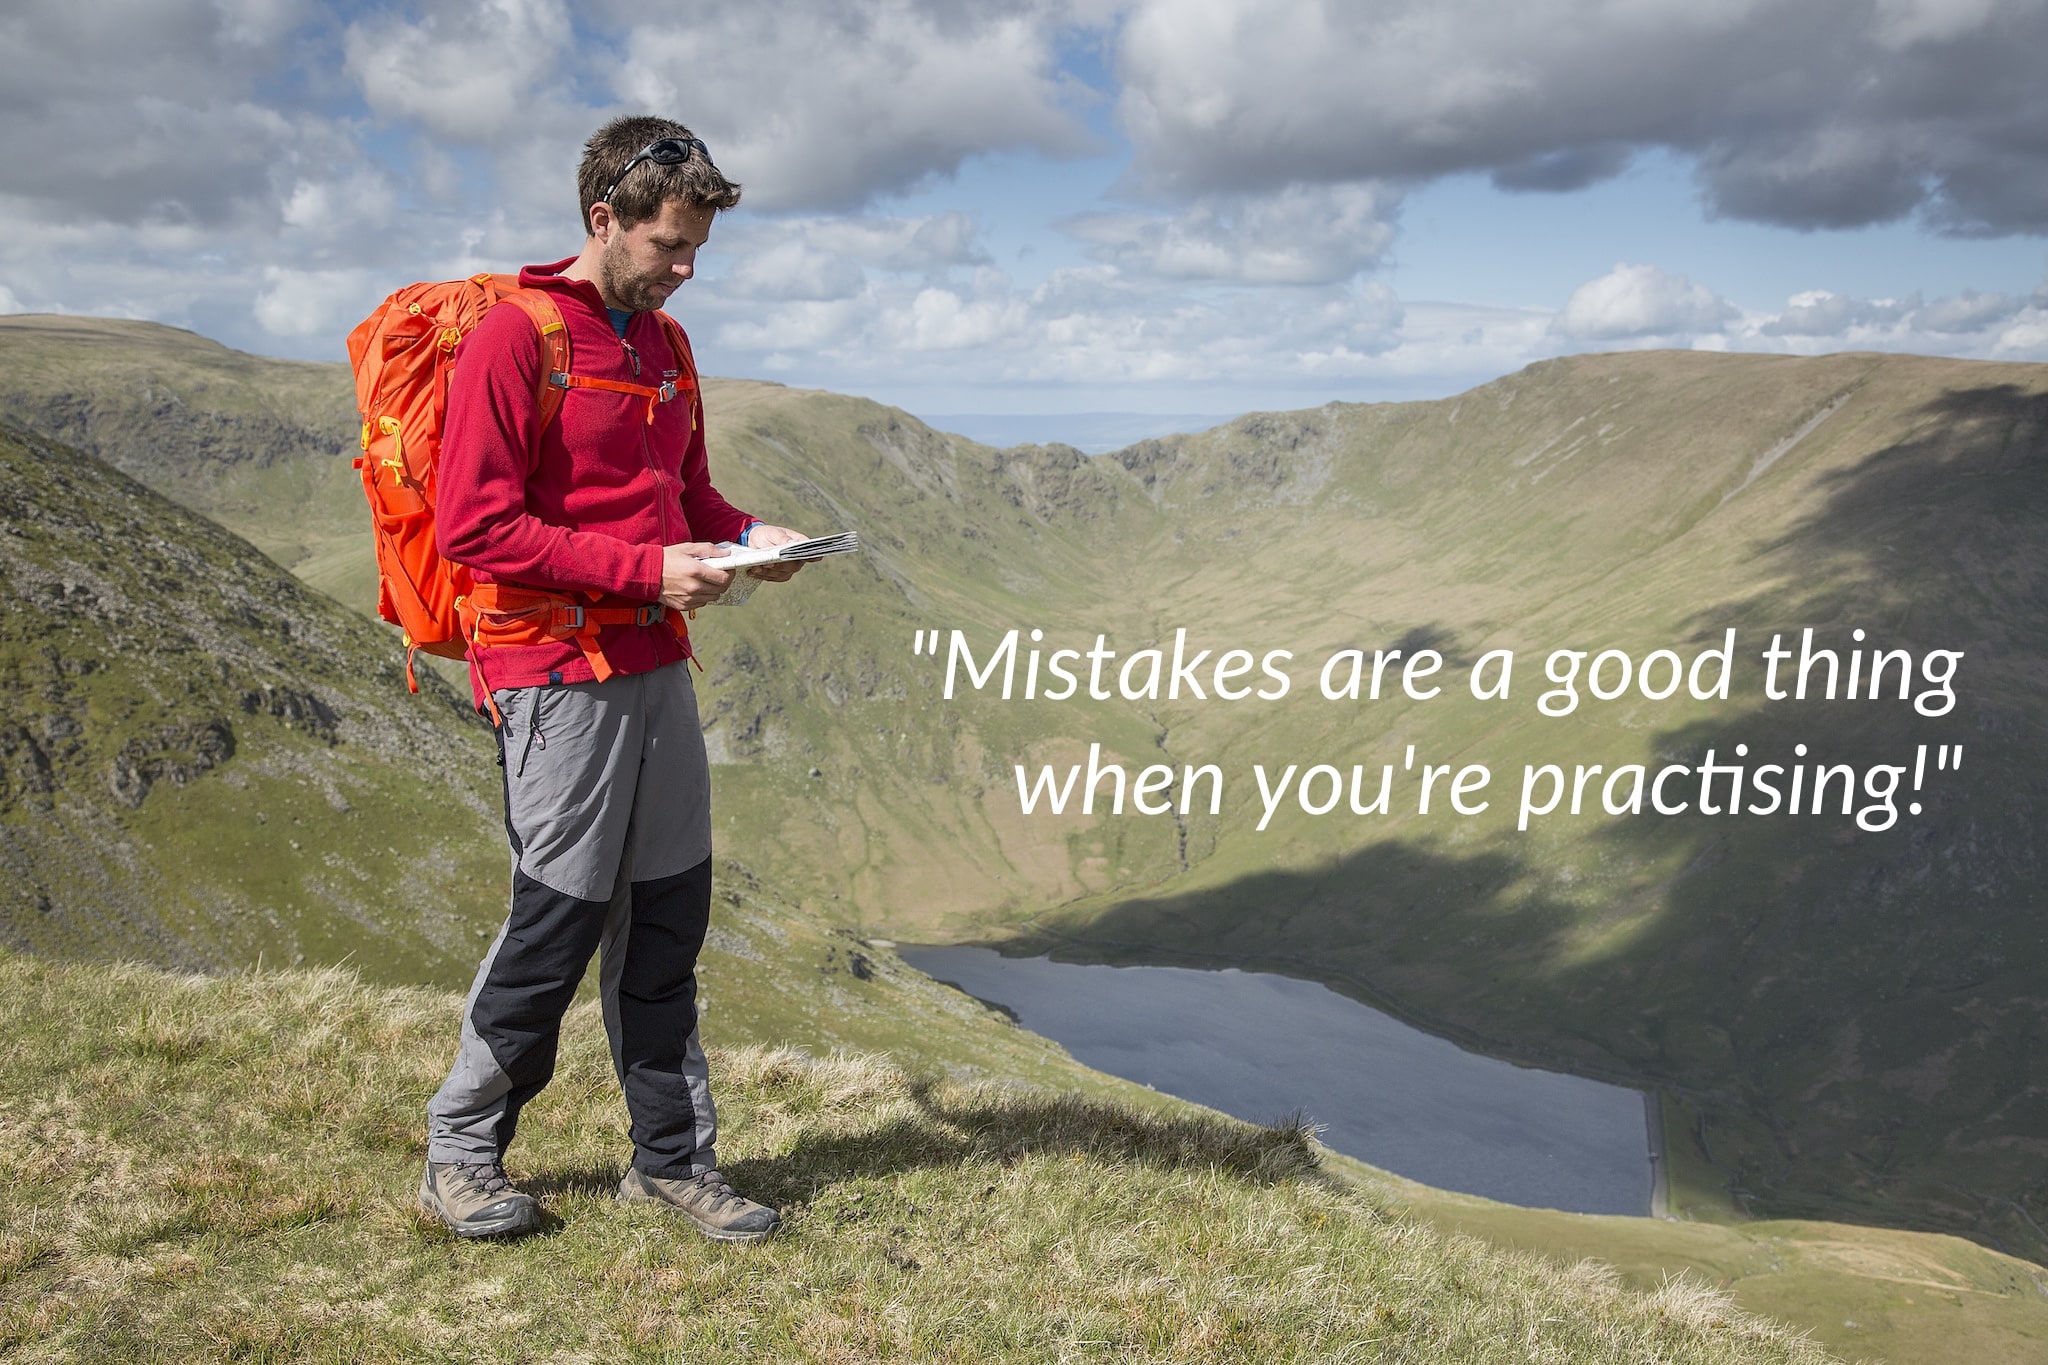 Mistakes are a good thing when you're practising!